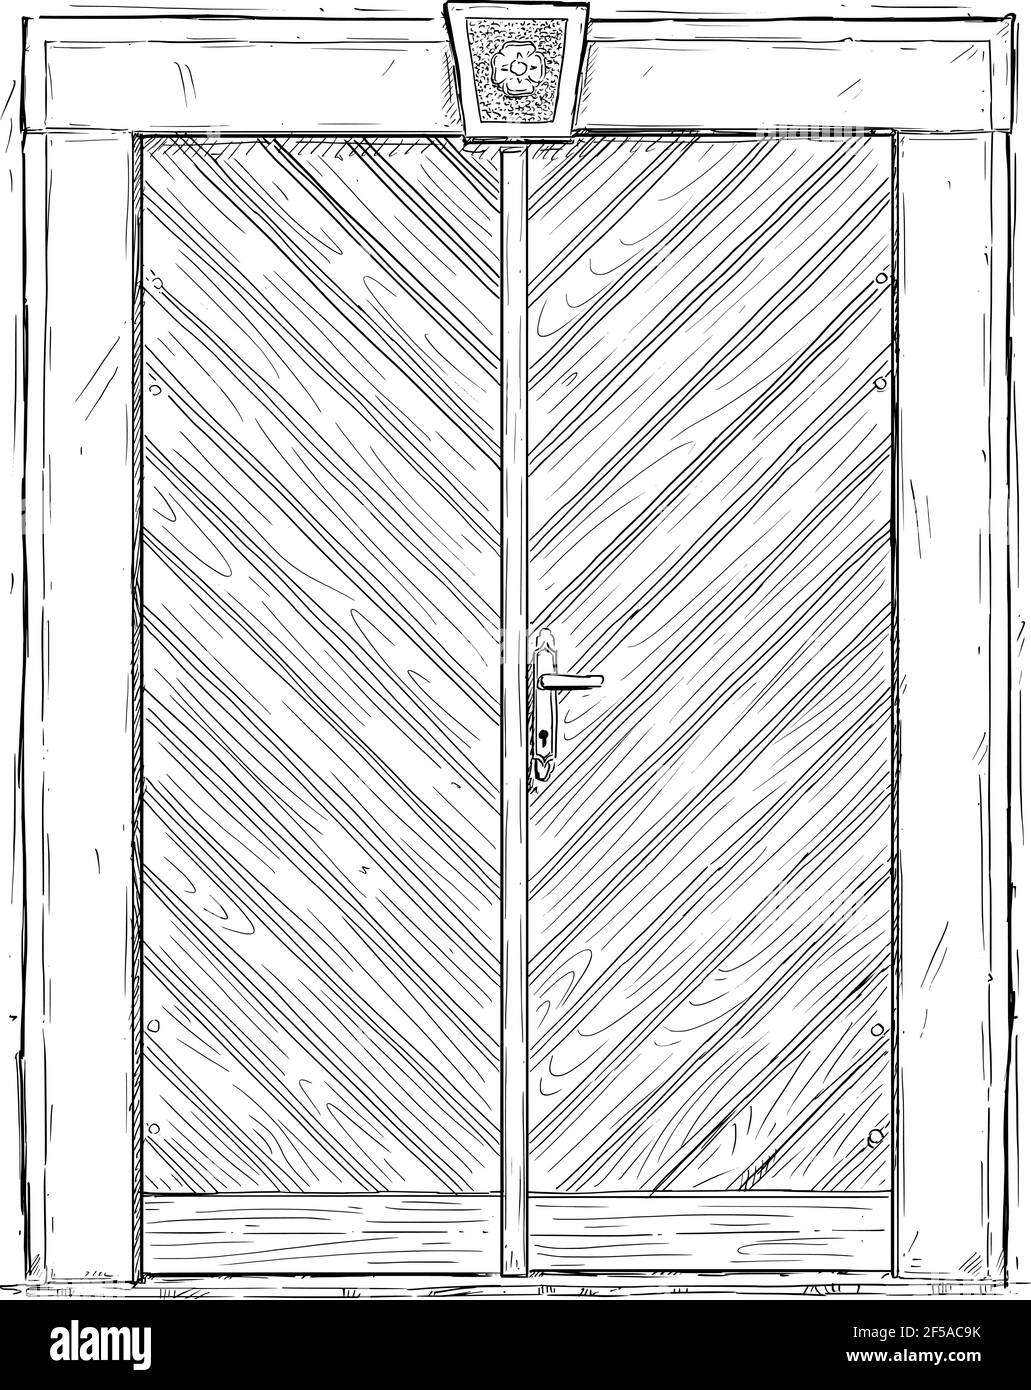 Freehand Drawing Ornate Old Wooden Door Stock Vector Royalty Free  1939788025  Shutterstock